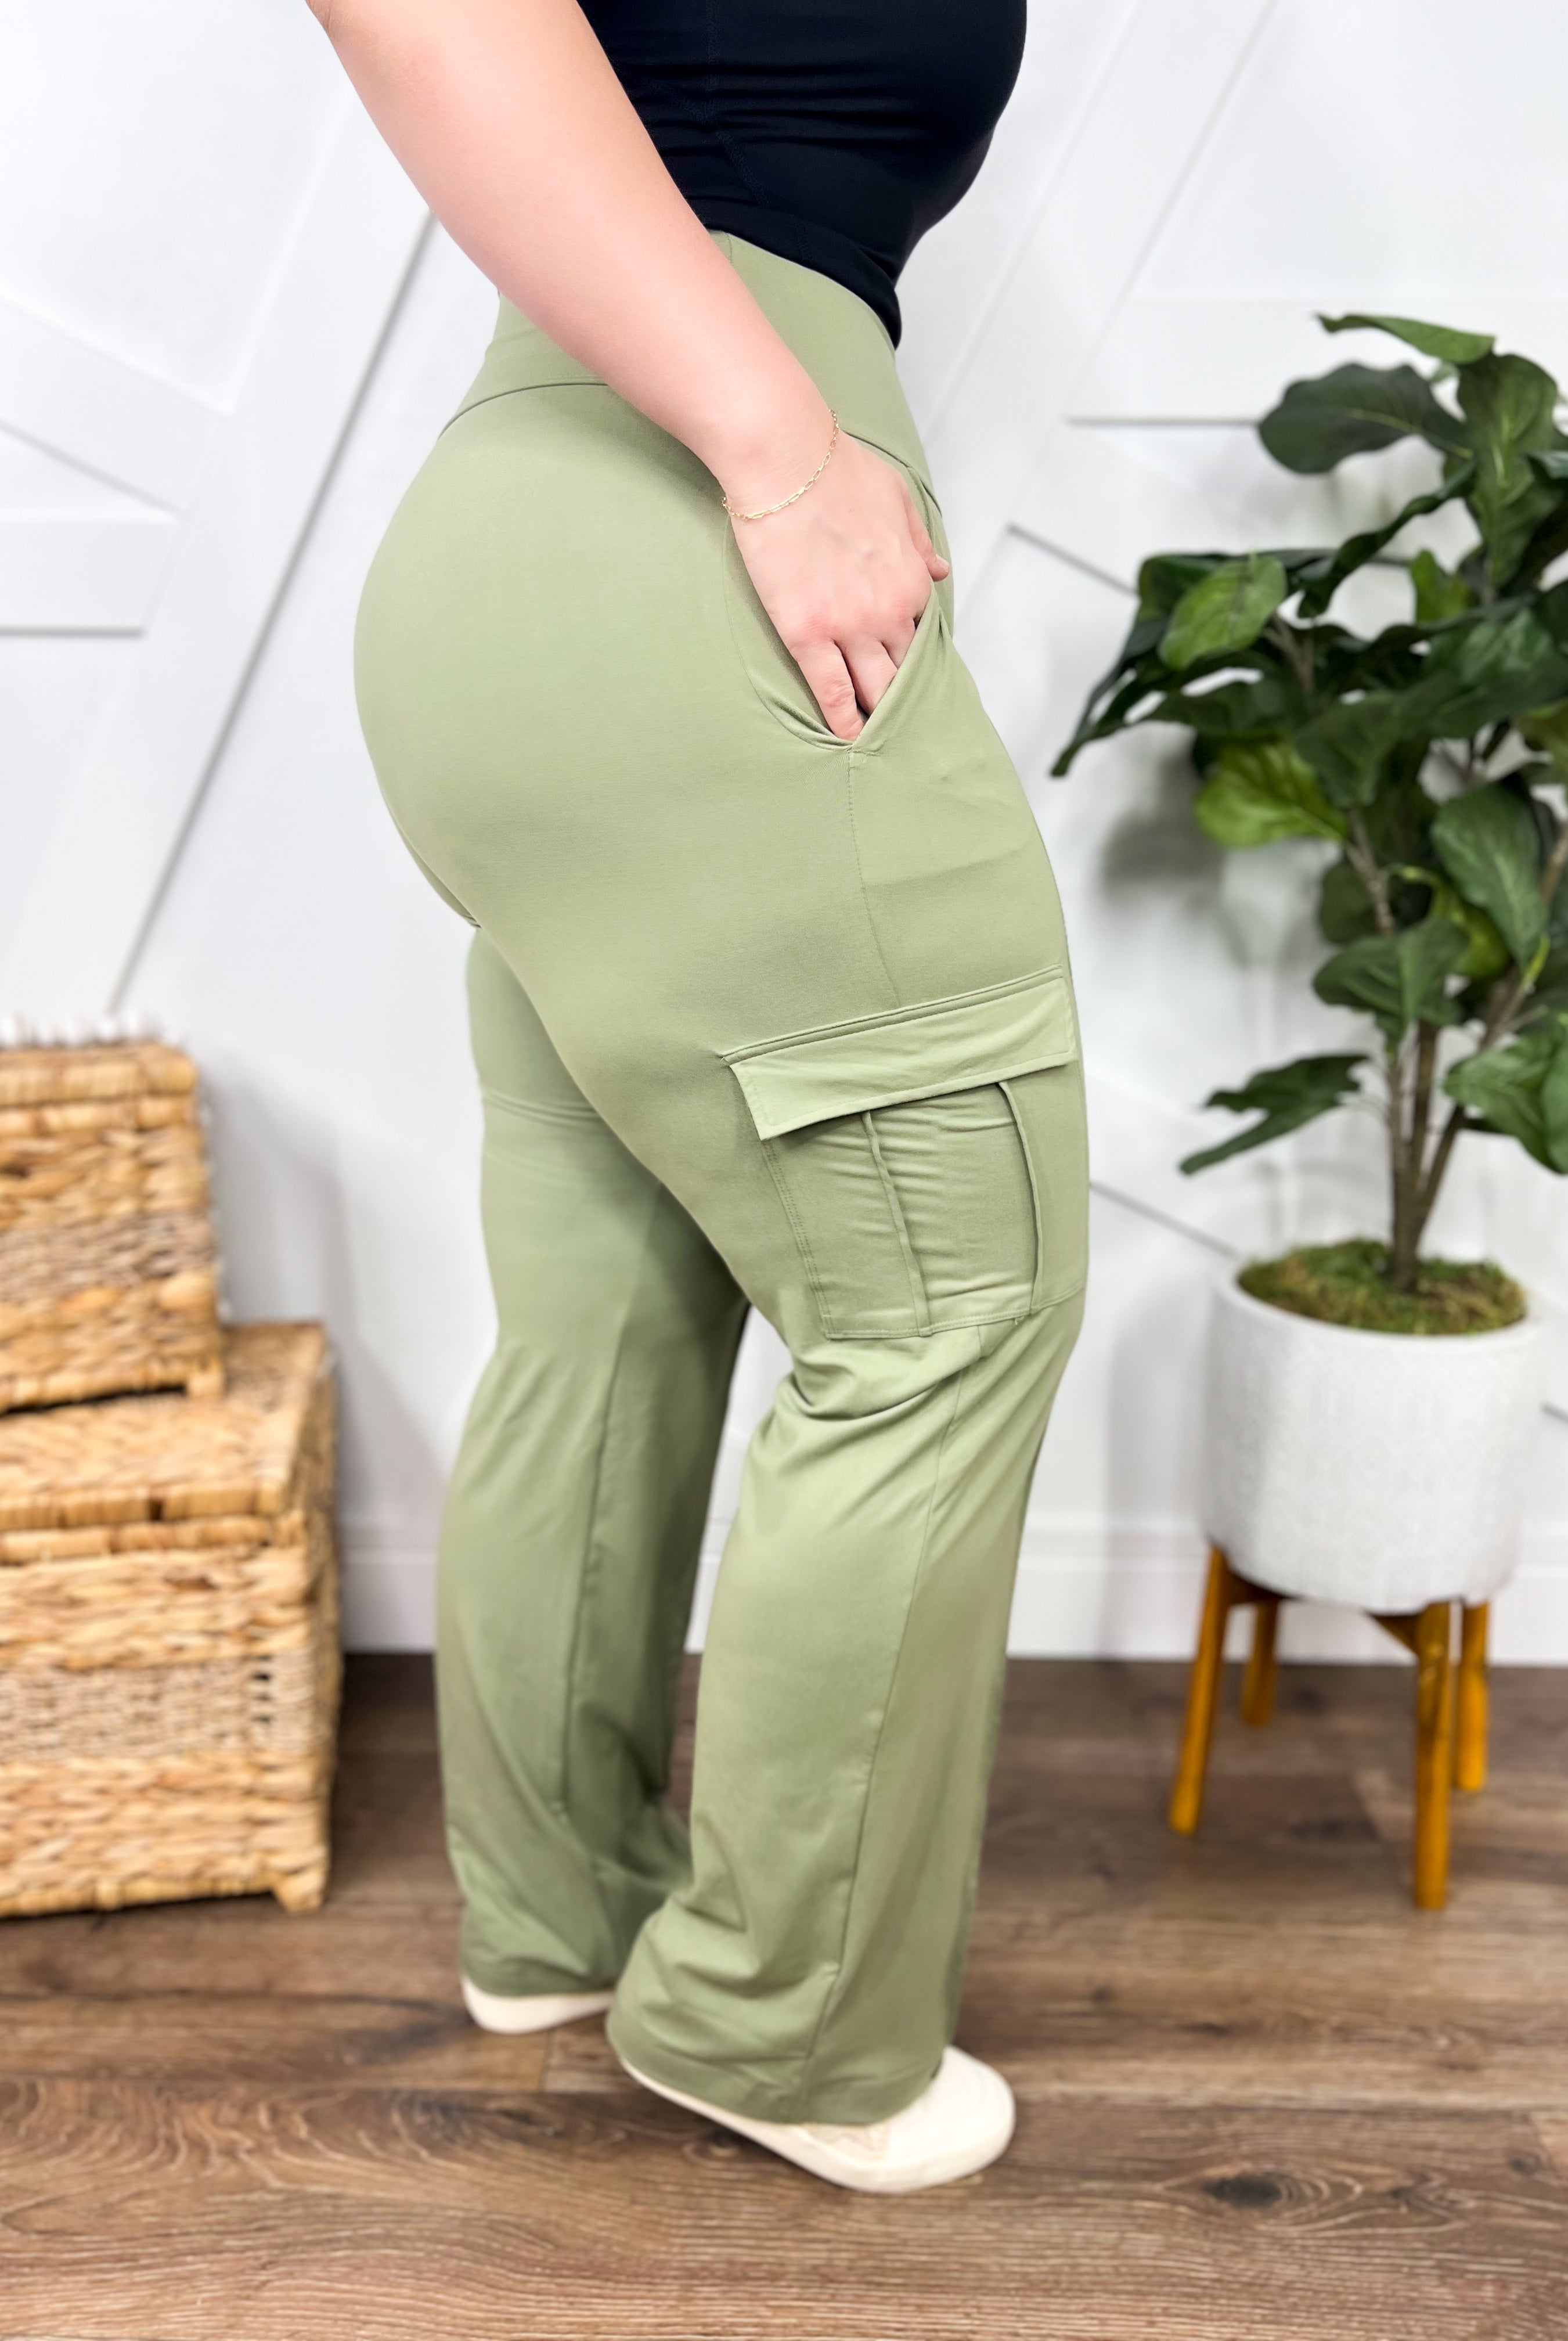 RESTOCK : Kim Possible Cargo Pants-150 PANTS-Rae Mode-Heathered Boho Boutique, Women's Fashion and Accessories in Palmetto, FL